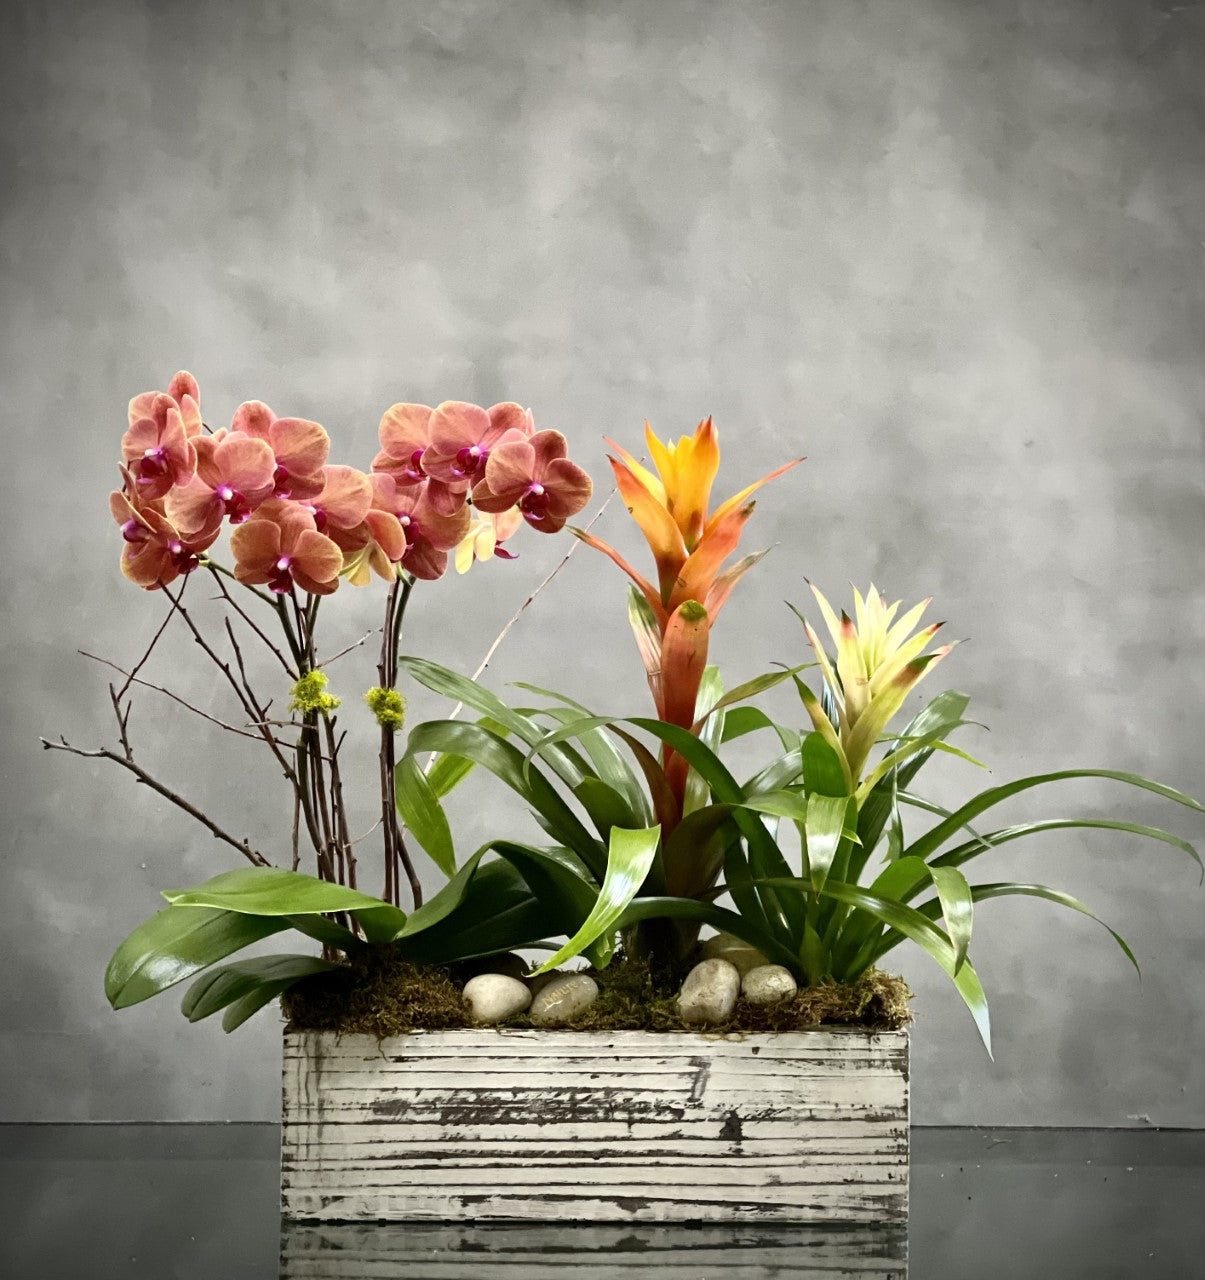 A superb design in so many ways Beverly Hills Florist presents Tropical punch for same day delivery .... This unique floral piece is a stunning mix of mini orchids and bromelia plants in a wooden box filled with rocks. a "nature" engraved rock is included with the arrangement. Delicate and eye catching for Birthdays, Get well soon, office décor and more.  Approx: 12 H x 21" W . Please pick the wording you like for the arrangement and let us know under florist note.